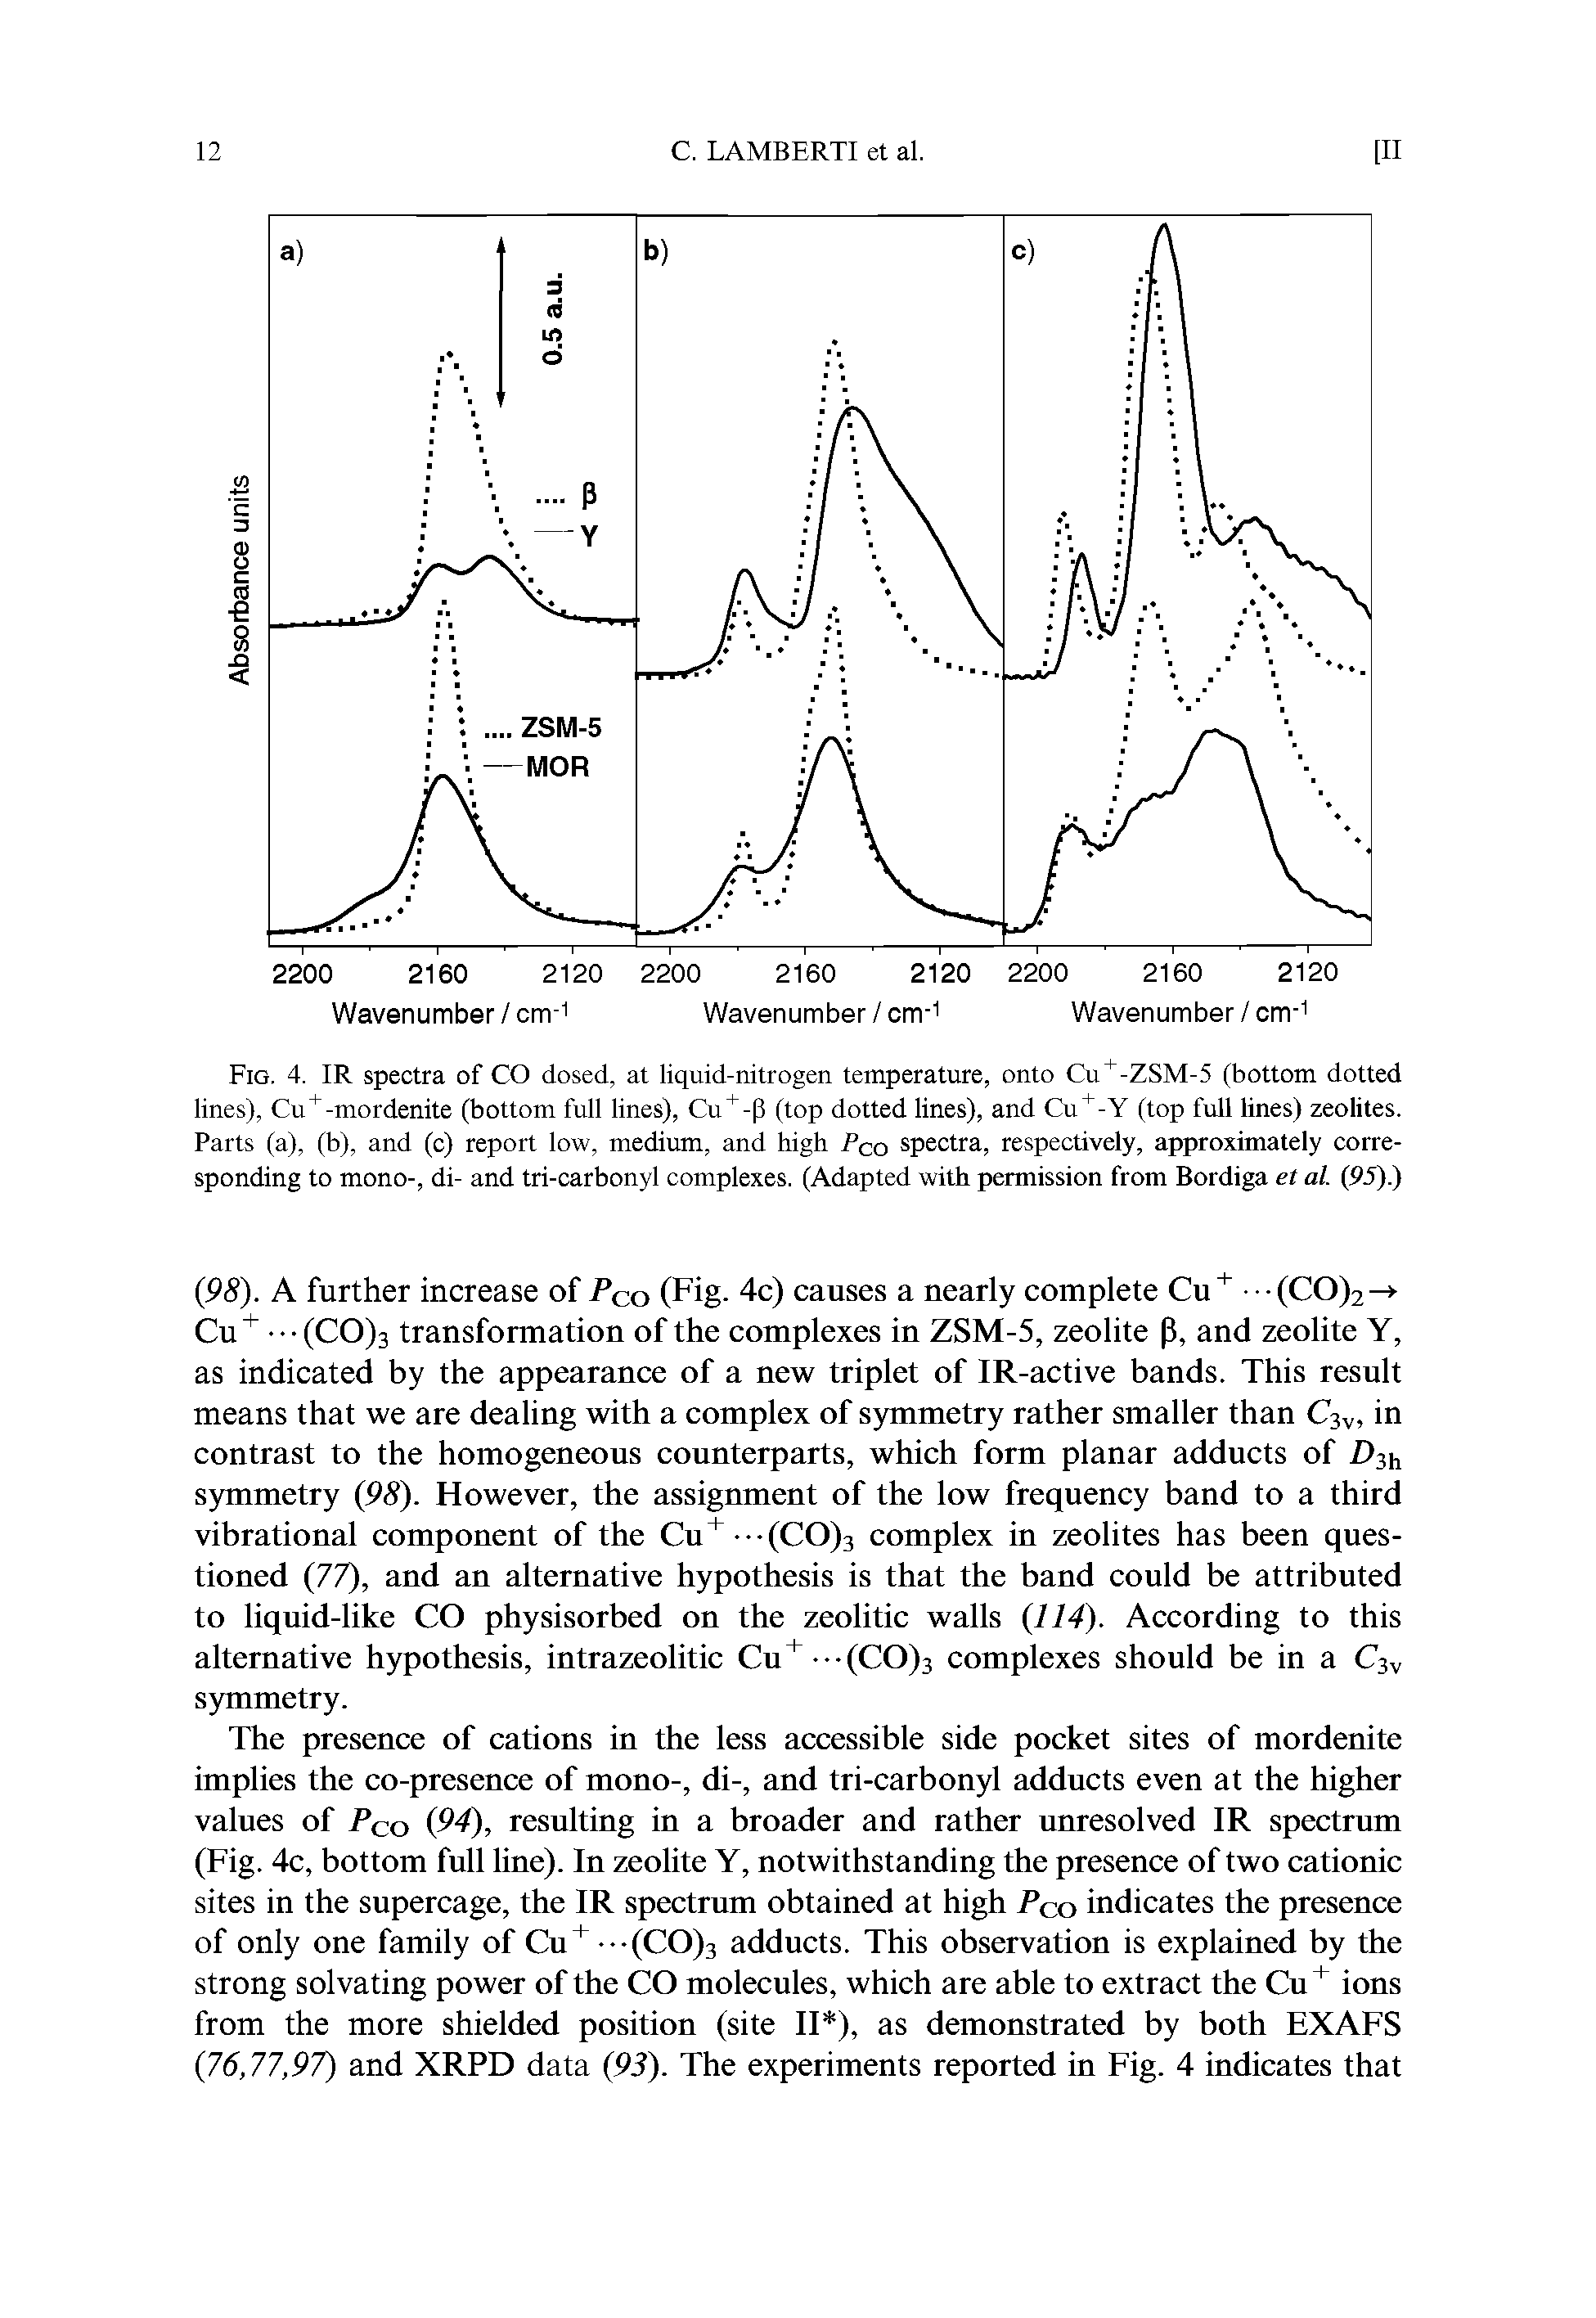 Fig. 4. IR spectra of CO dosed, at liquid-nitrogen temperature, onto Cu -ZSM-5 (bottom dotted lines), Cu -mordenite (bottom full lines), Cu -P (top dotted lines), and Cu -Y (top full lines) zeolites. Parts (a), (b), and (c) report low, medium, and high Pco spectra, respectively, approximately corresponding to mono-, di- and tri-carbonyl complexes. (Adapted with permission from Bordiga et al. (P5).)...